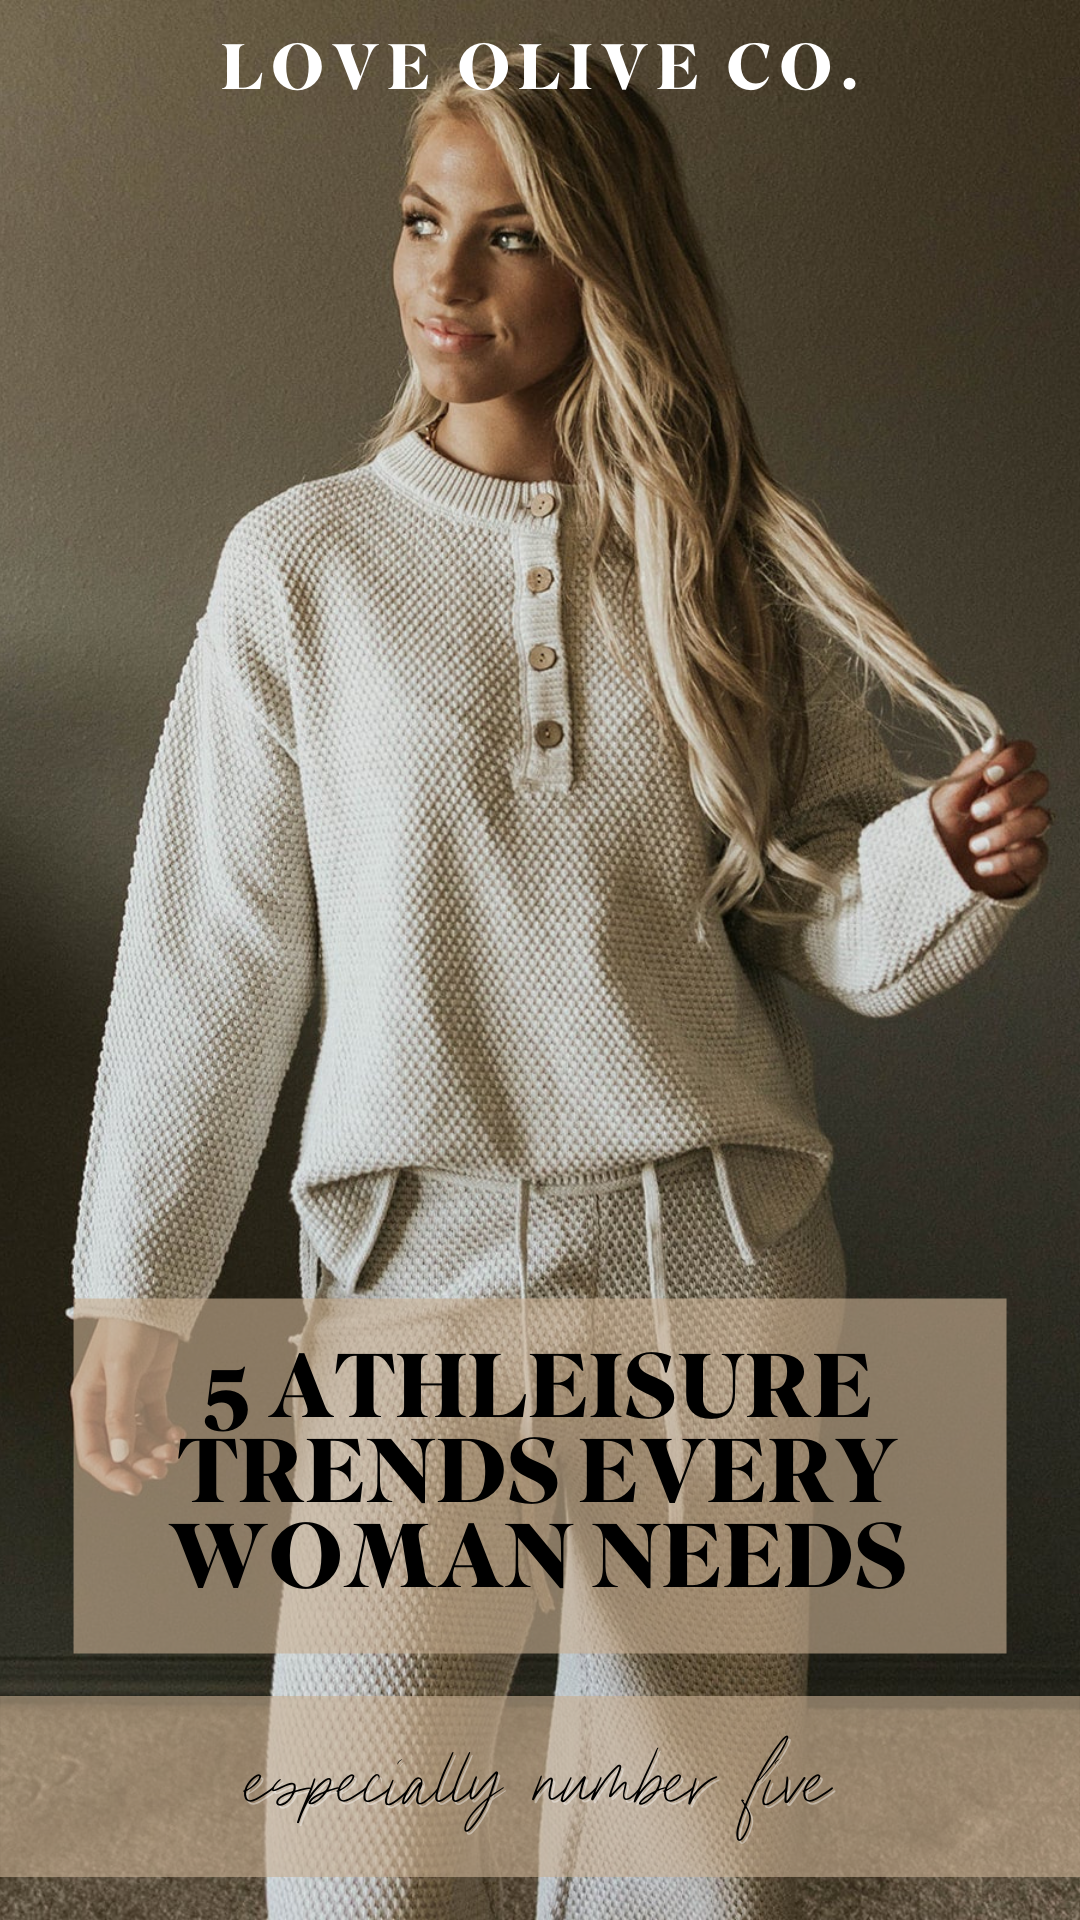 5 athleisure trends every woman needs. www.loveoliveco.com